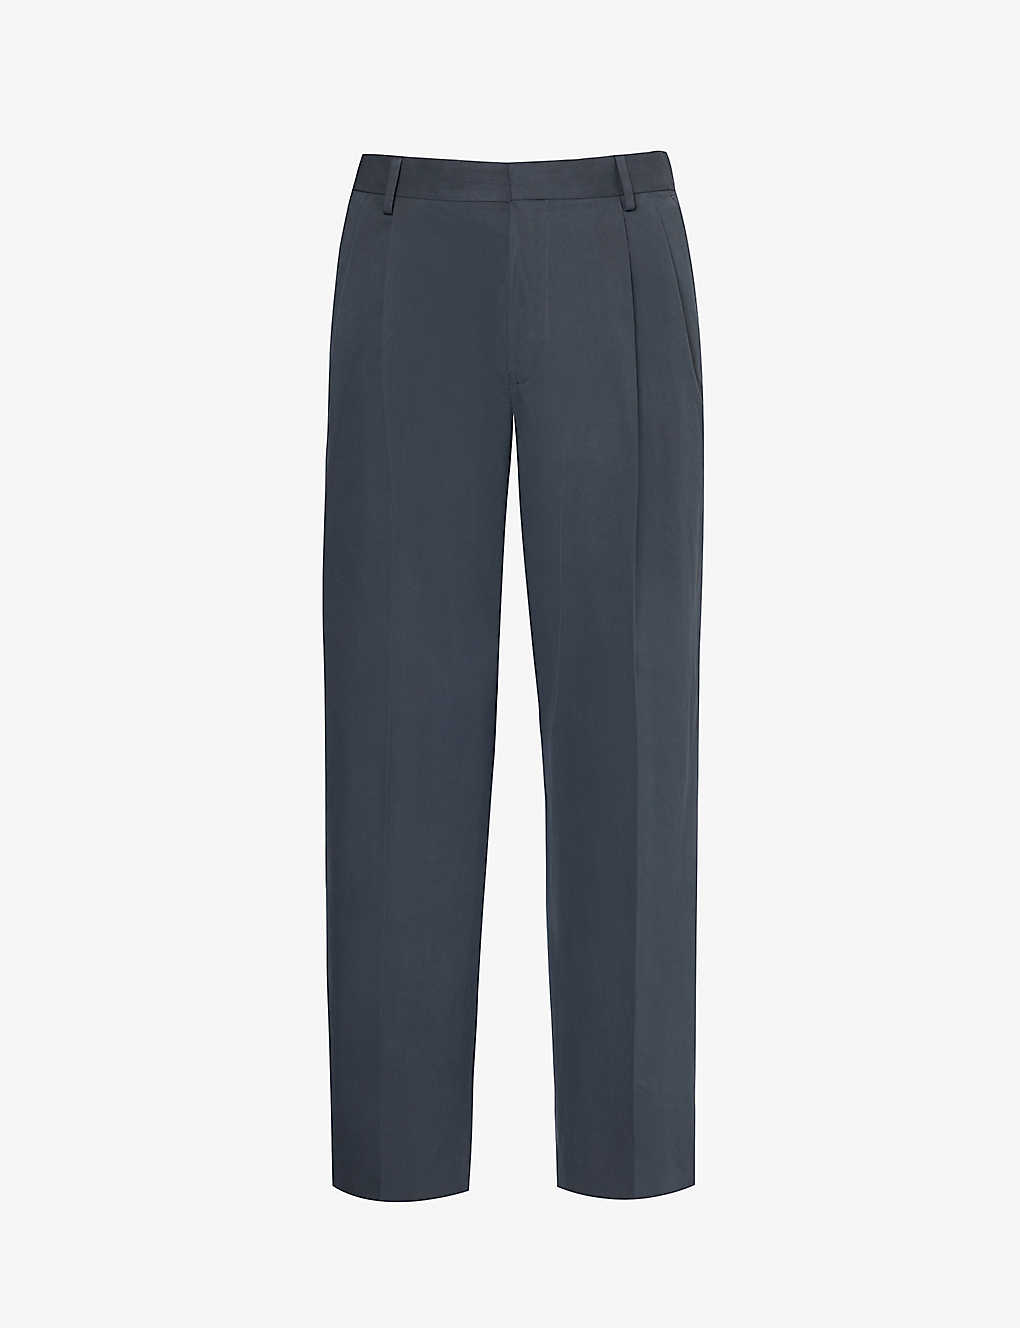 Dries Van Noten Mens Anthracite Pleated Straight-leg Cotton Trousers